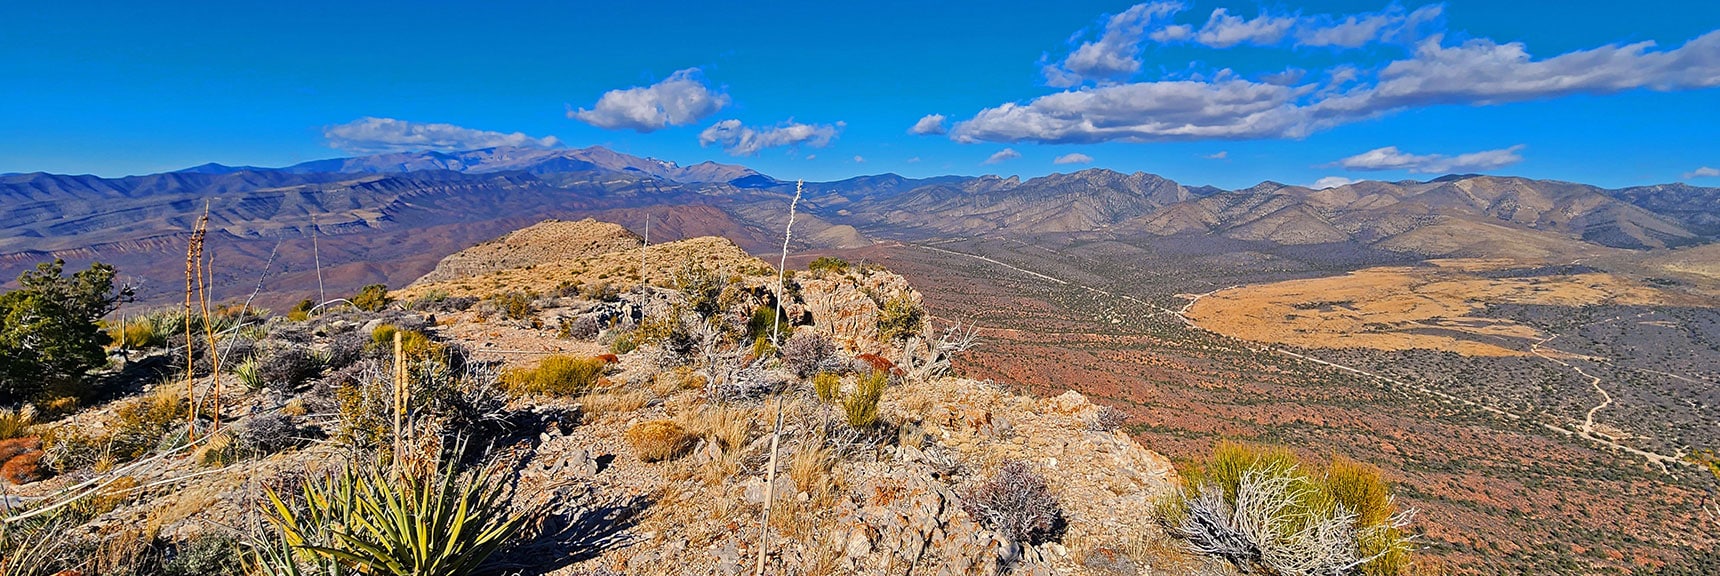 View North up Lovell Canyon from the Landmark Bluff North Summit to the Mt. Charleston Wilderness. | Landmark Bluff Summit | Lovell Canyon, Nevada